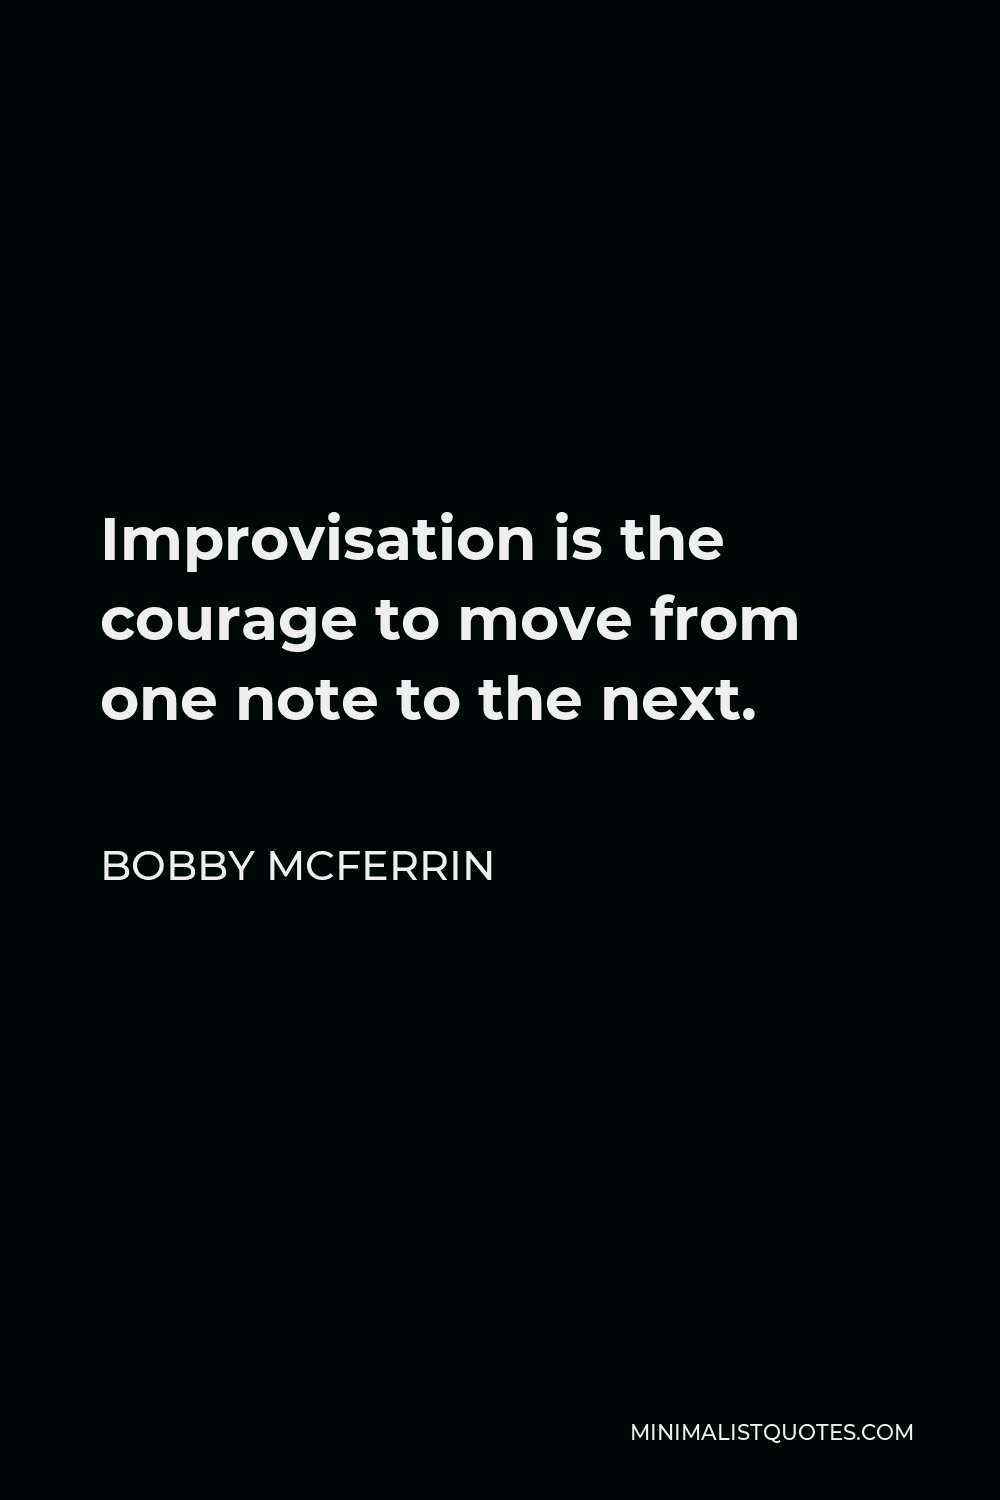 Bobby McFerrin Quote - Improvisation is the courage to move from one note to the next.